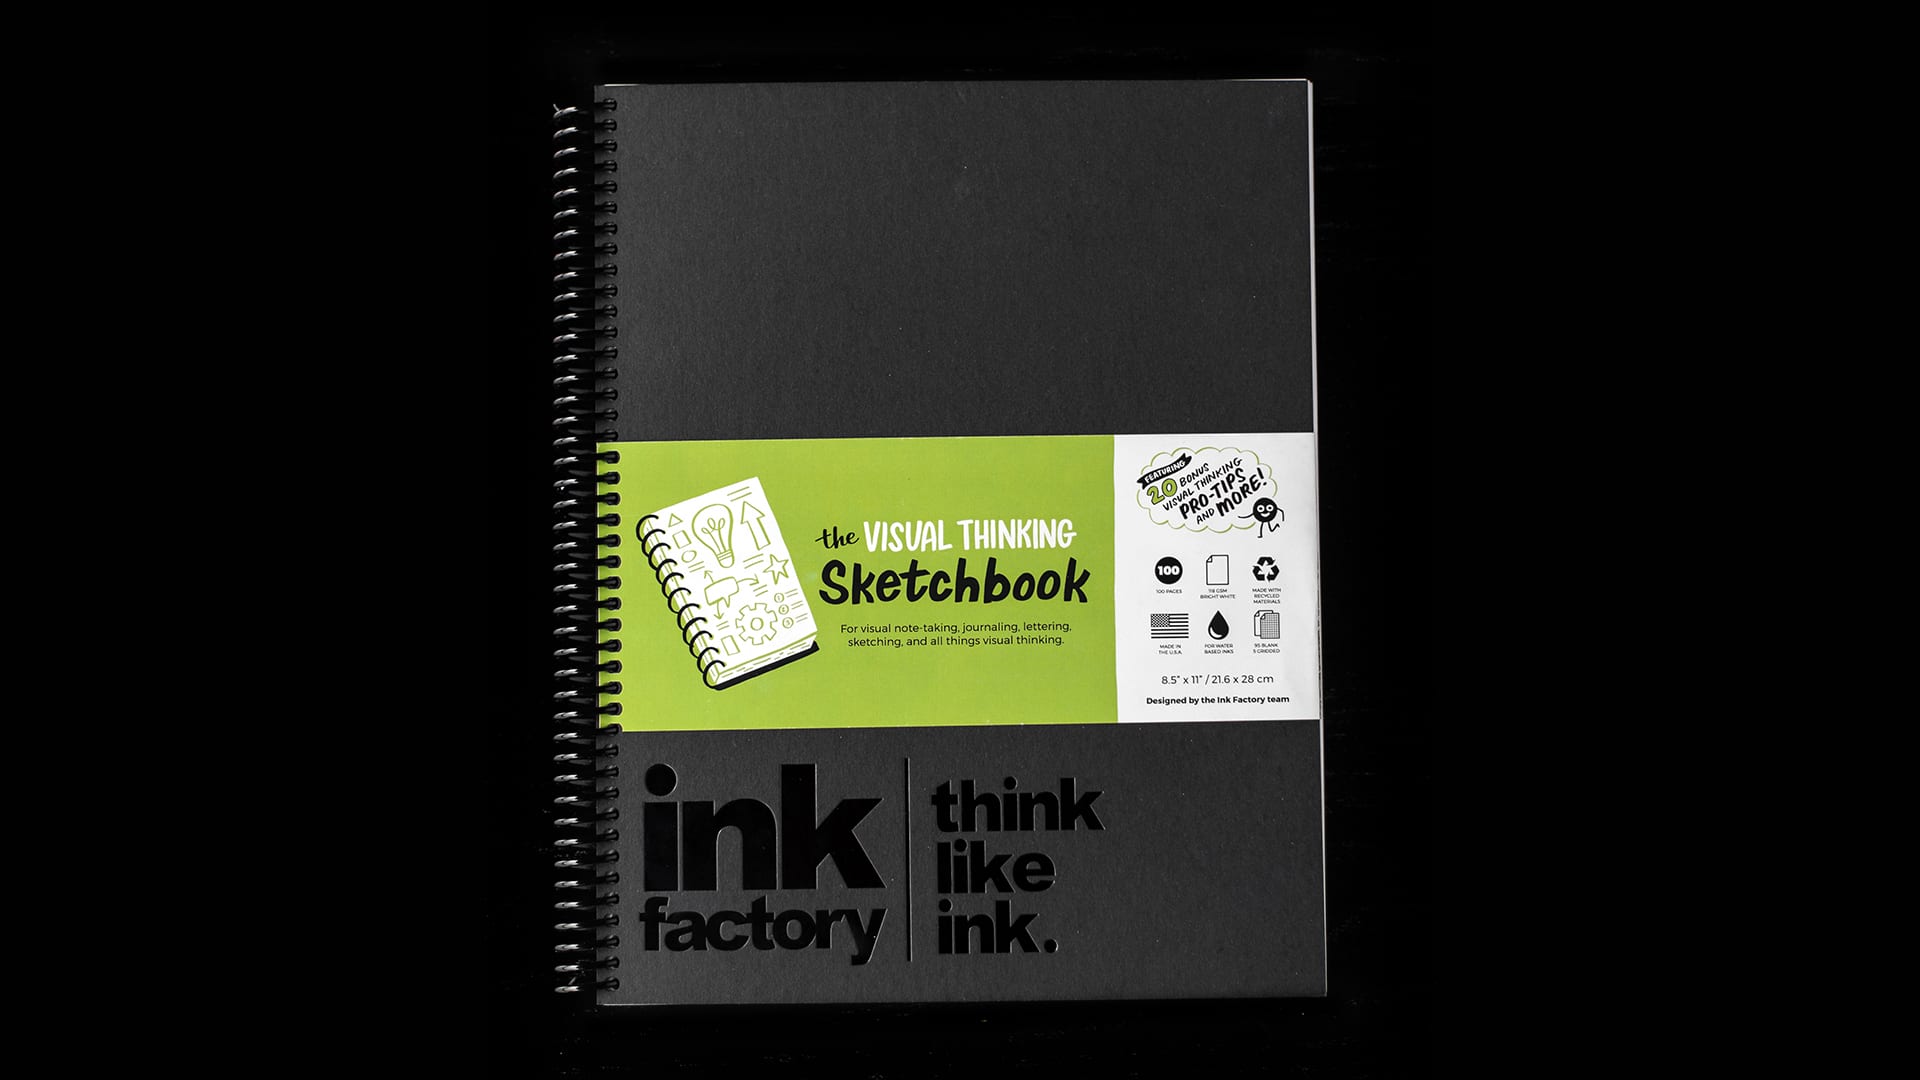 Ink Factory's Sketchbook for Sketchnotes: The Visual Thinking